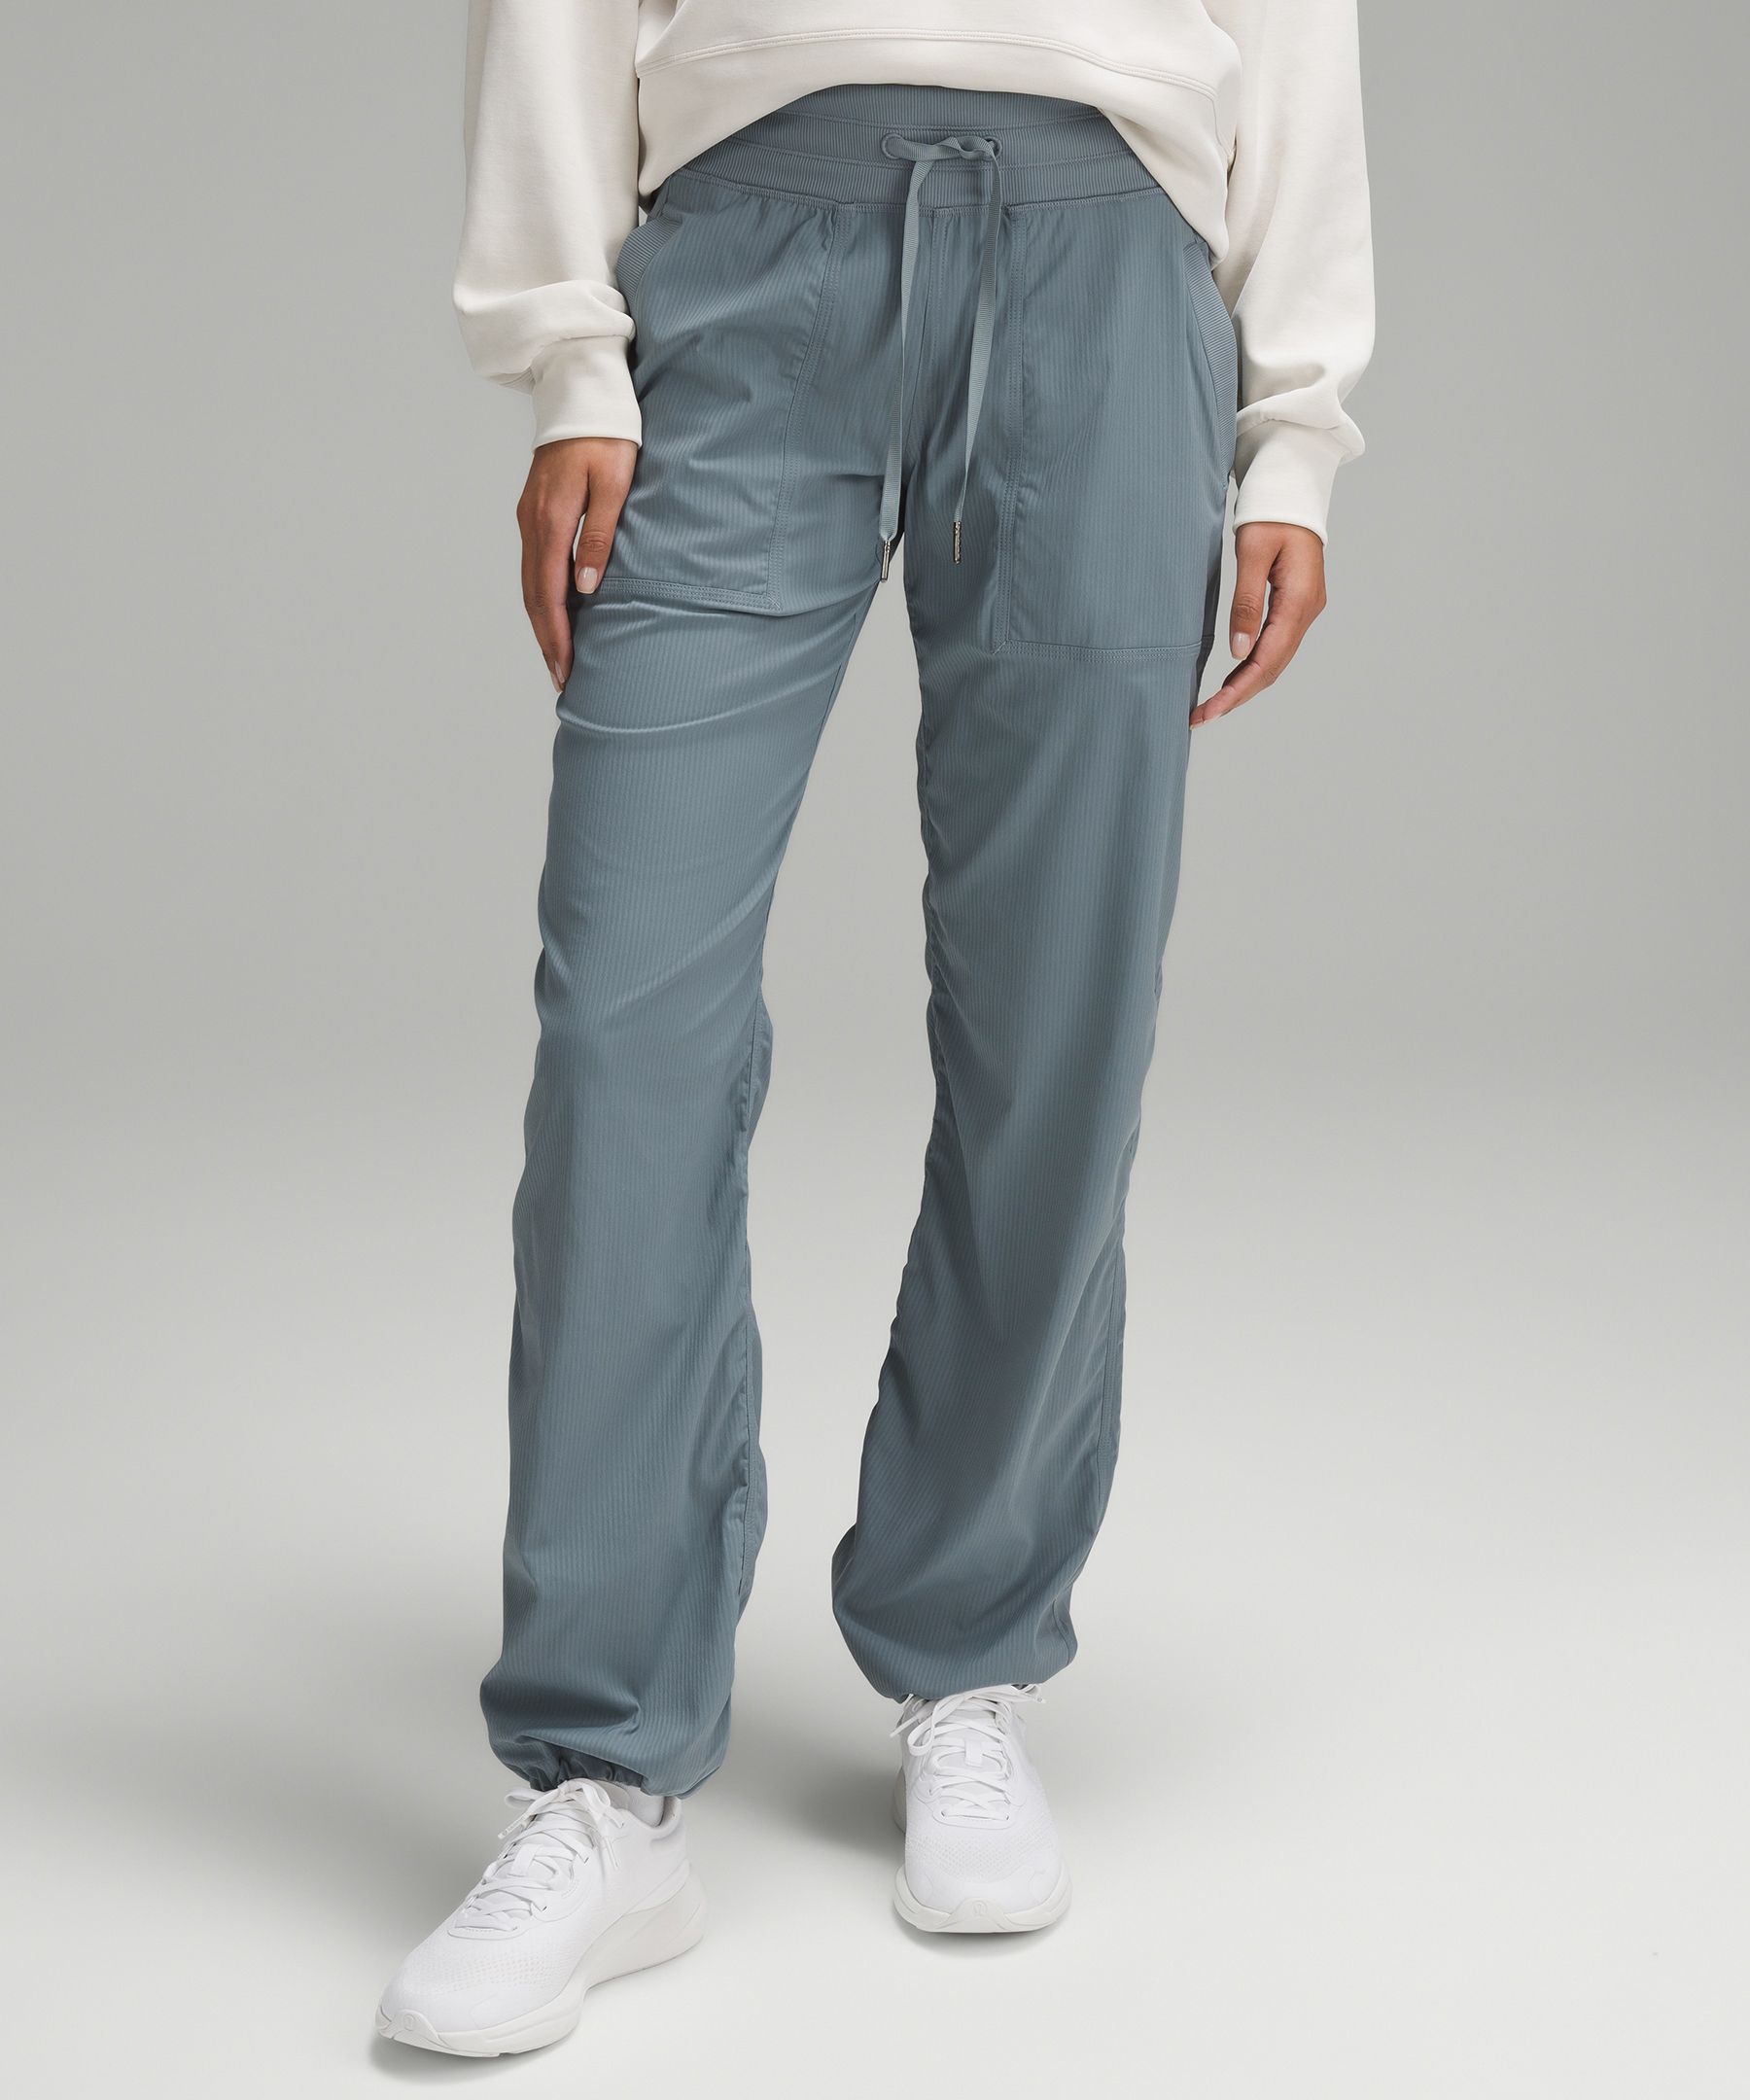 Women's On The Move Pants